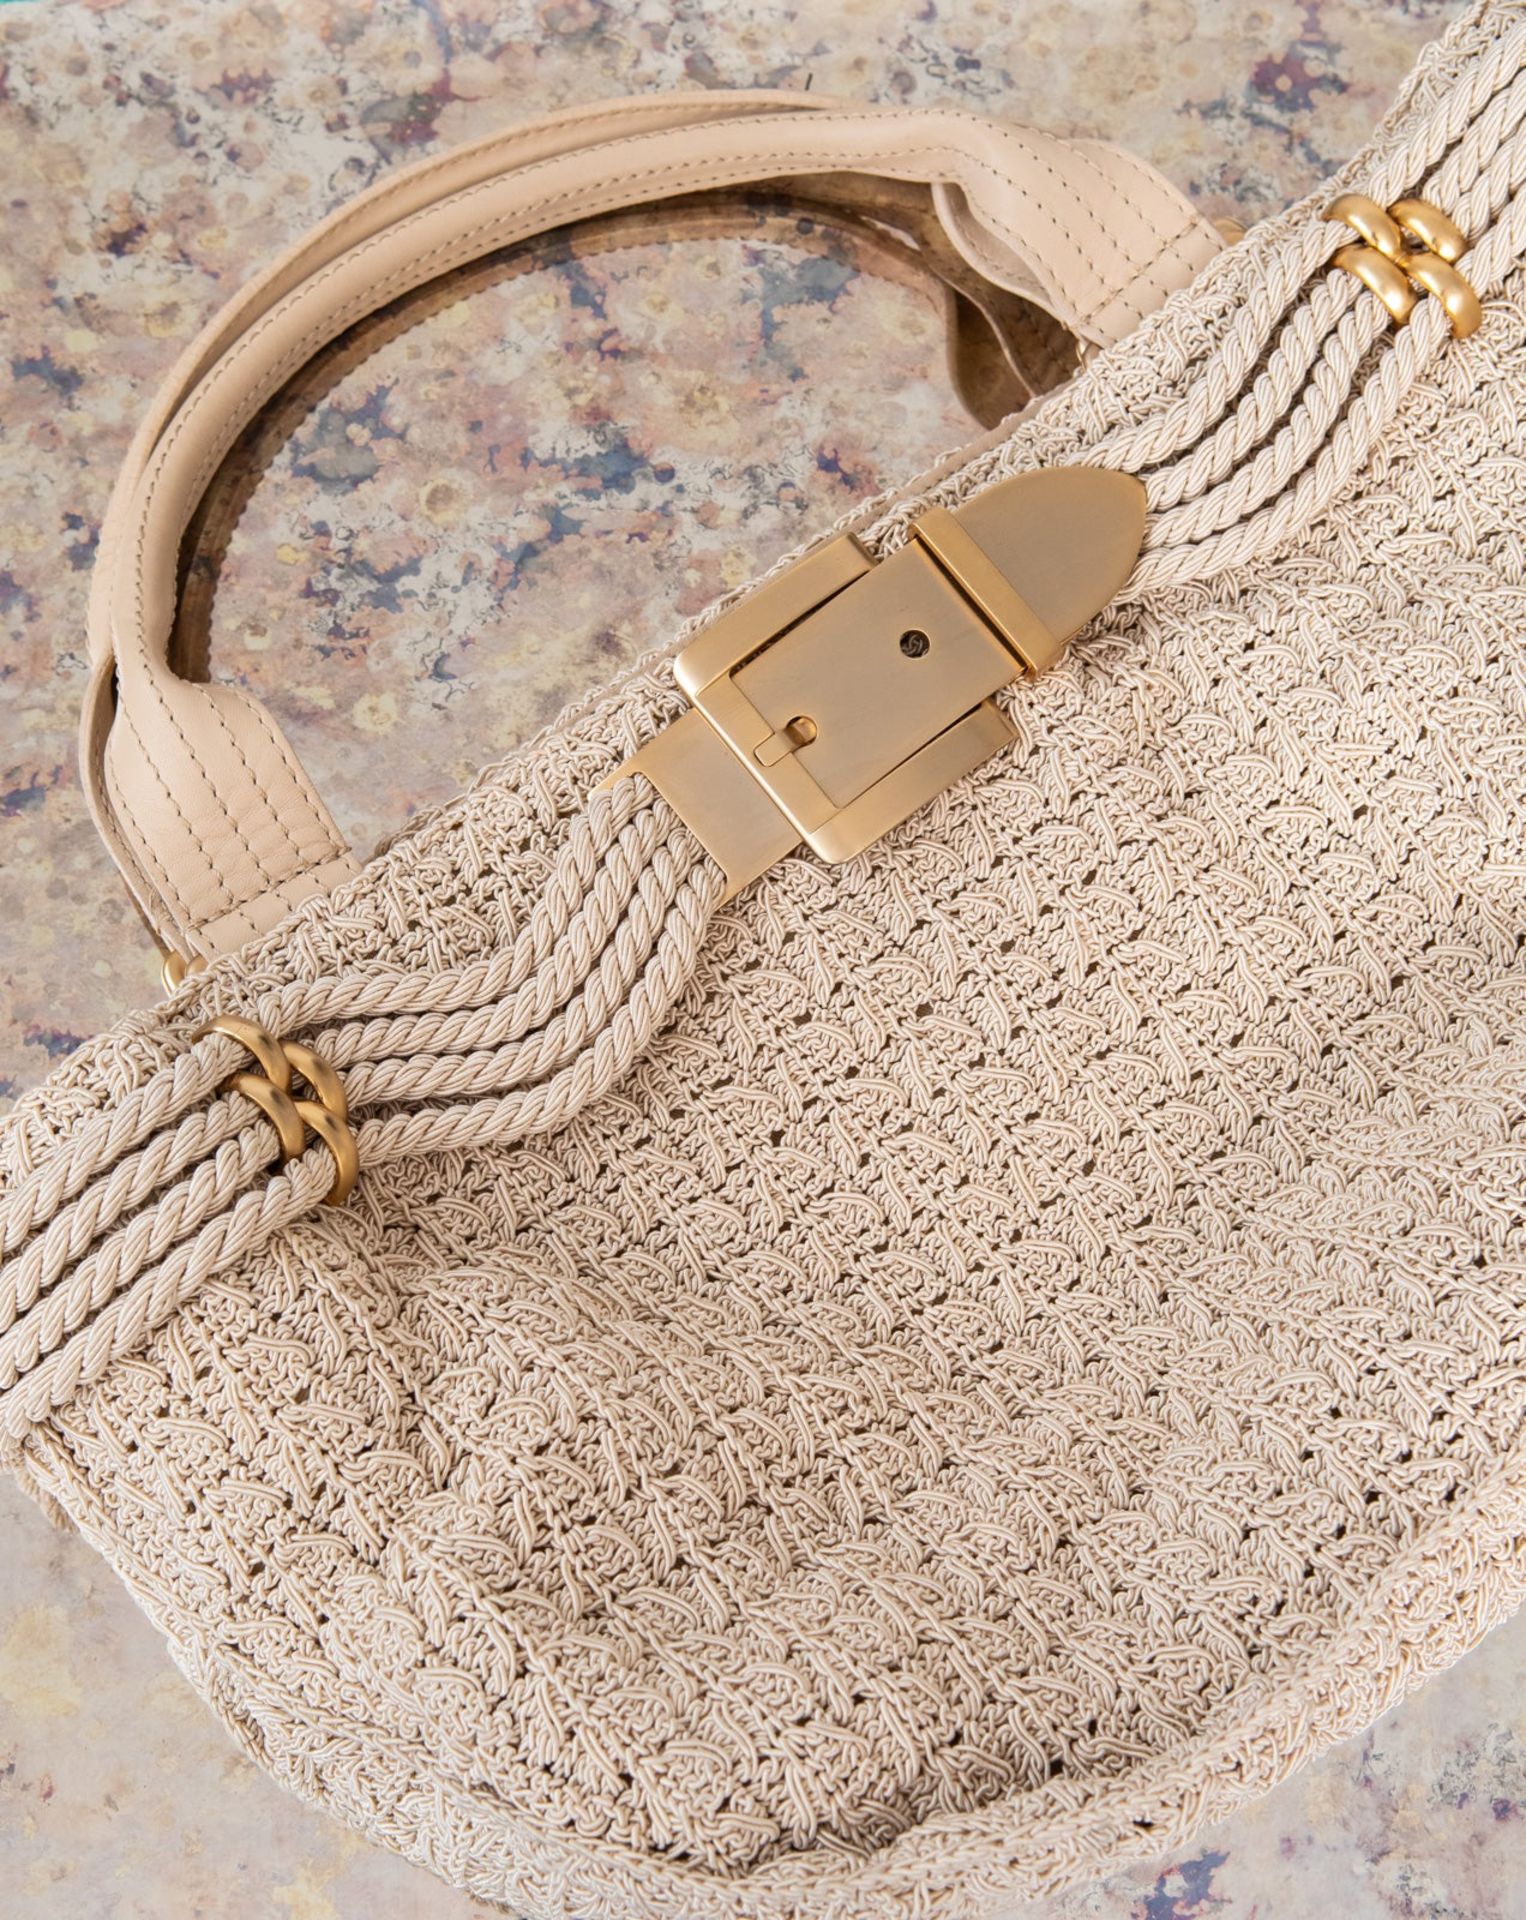 Jimmy Choo Cream Fabric And Leather Bag - Image 5 of 8